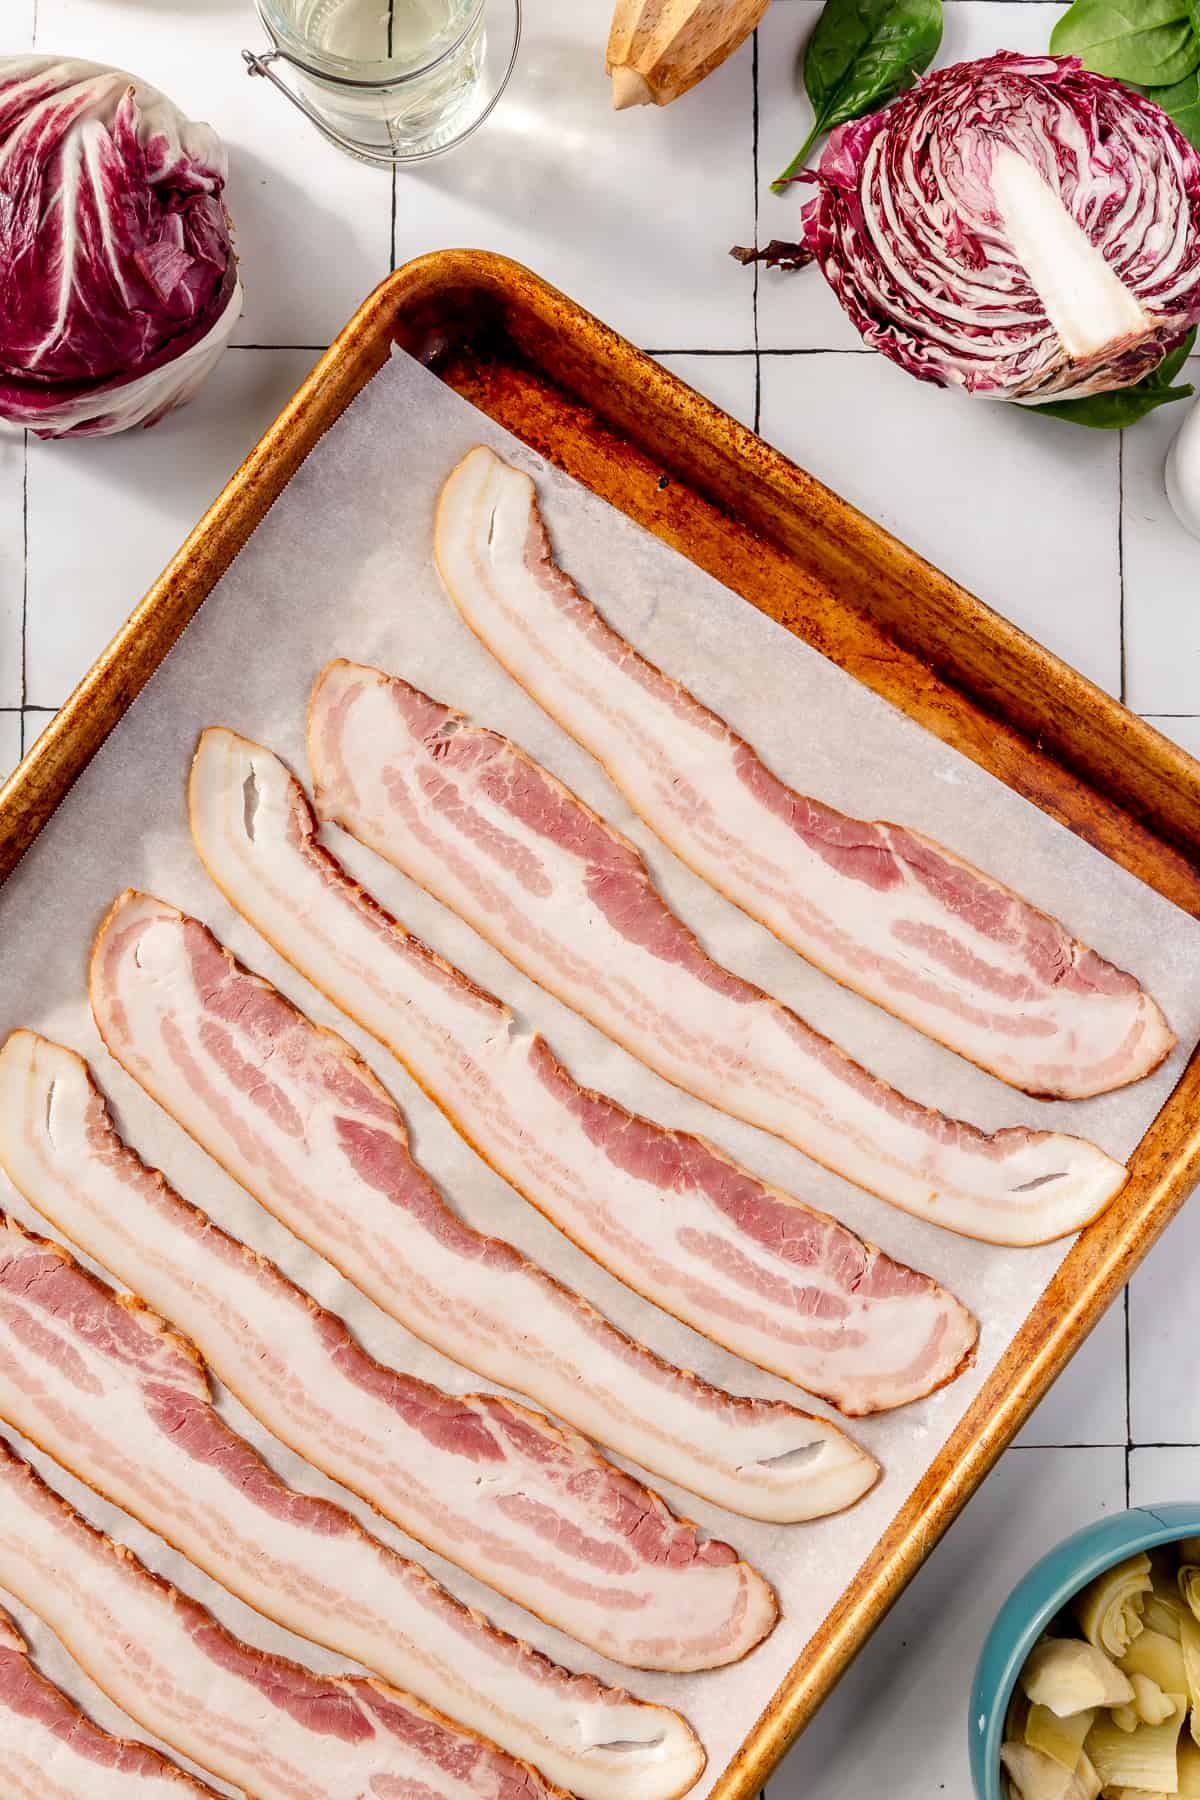 Raw bacon on a sheet pan lined with parchment paper. Other ingredients scattered around.